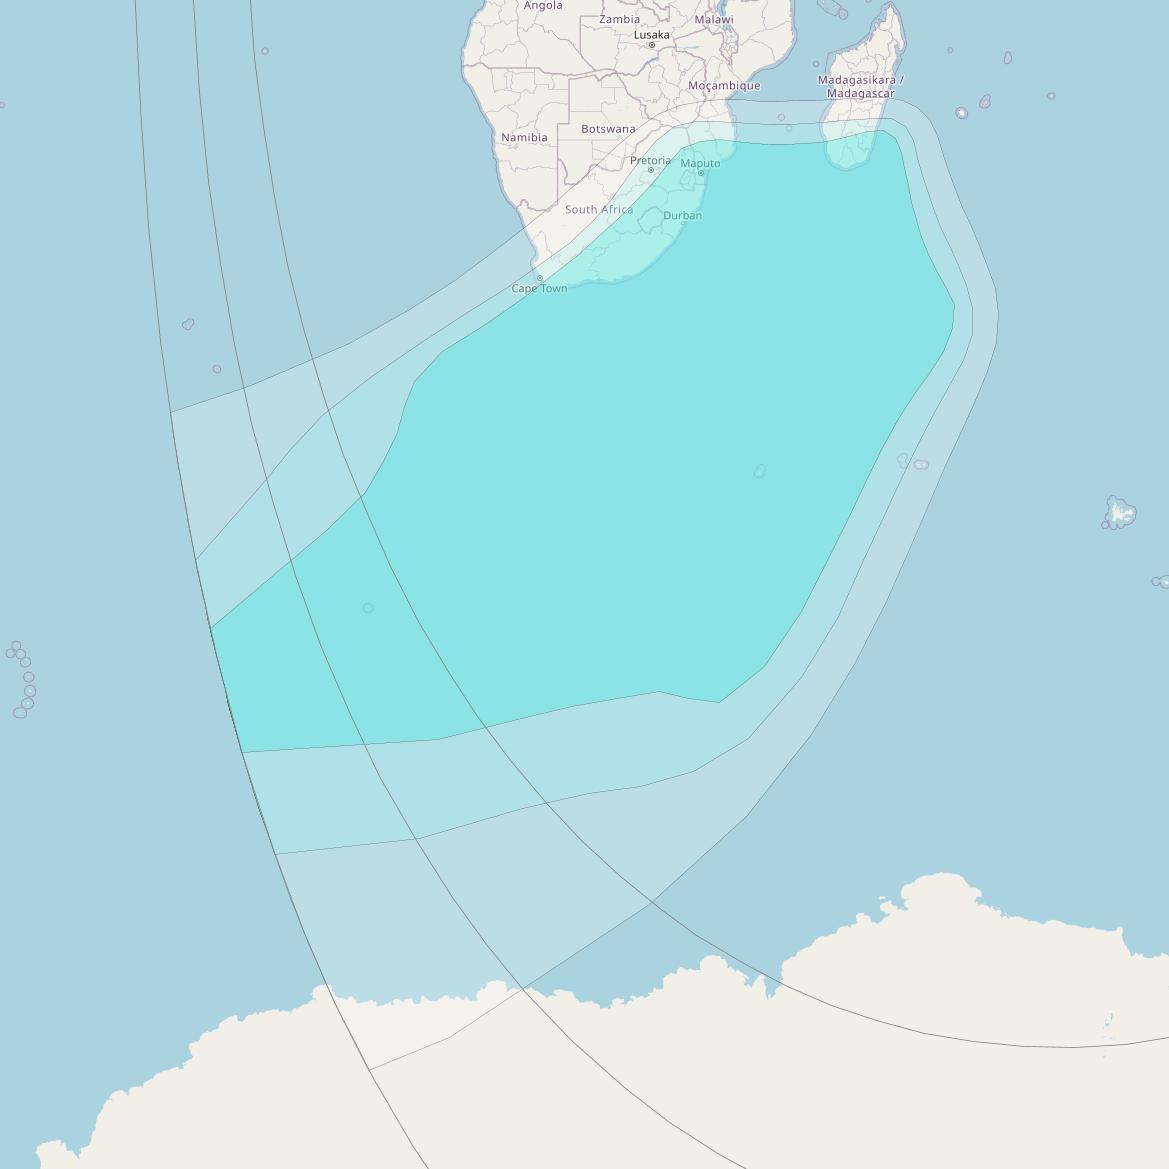 Inmarsat-4F2 at 64° E downlink L-band R013 Regional Spot beam coverage map